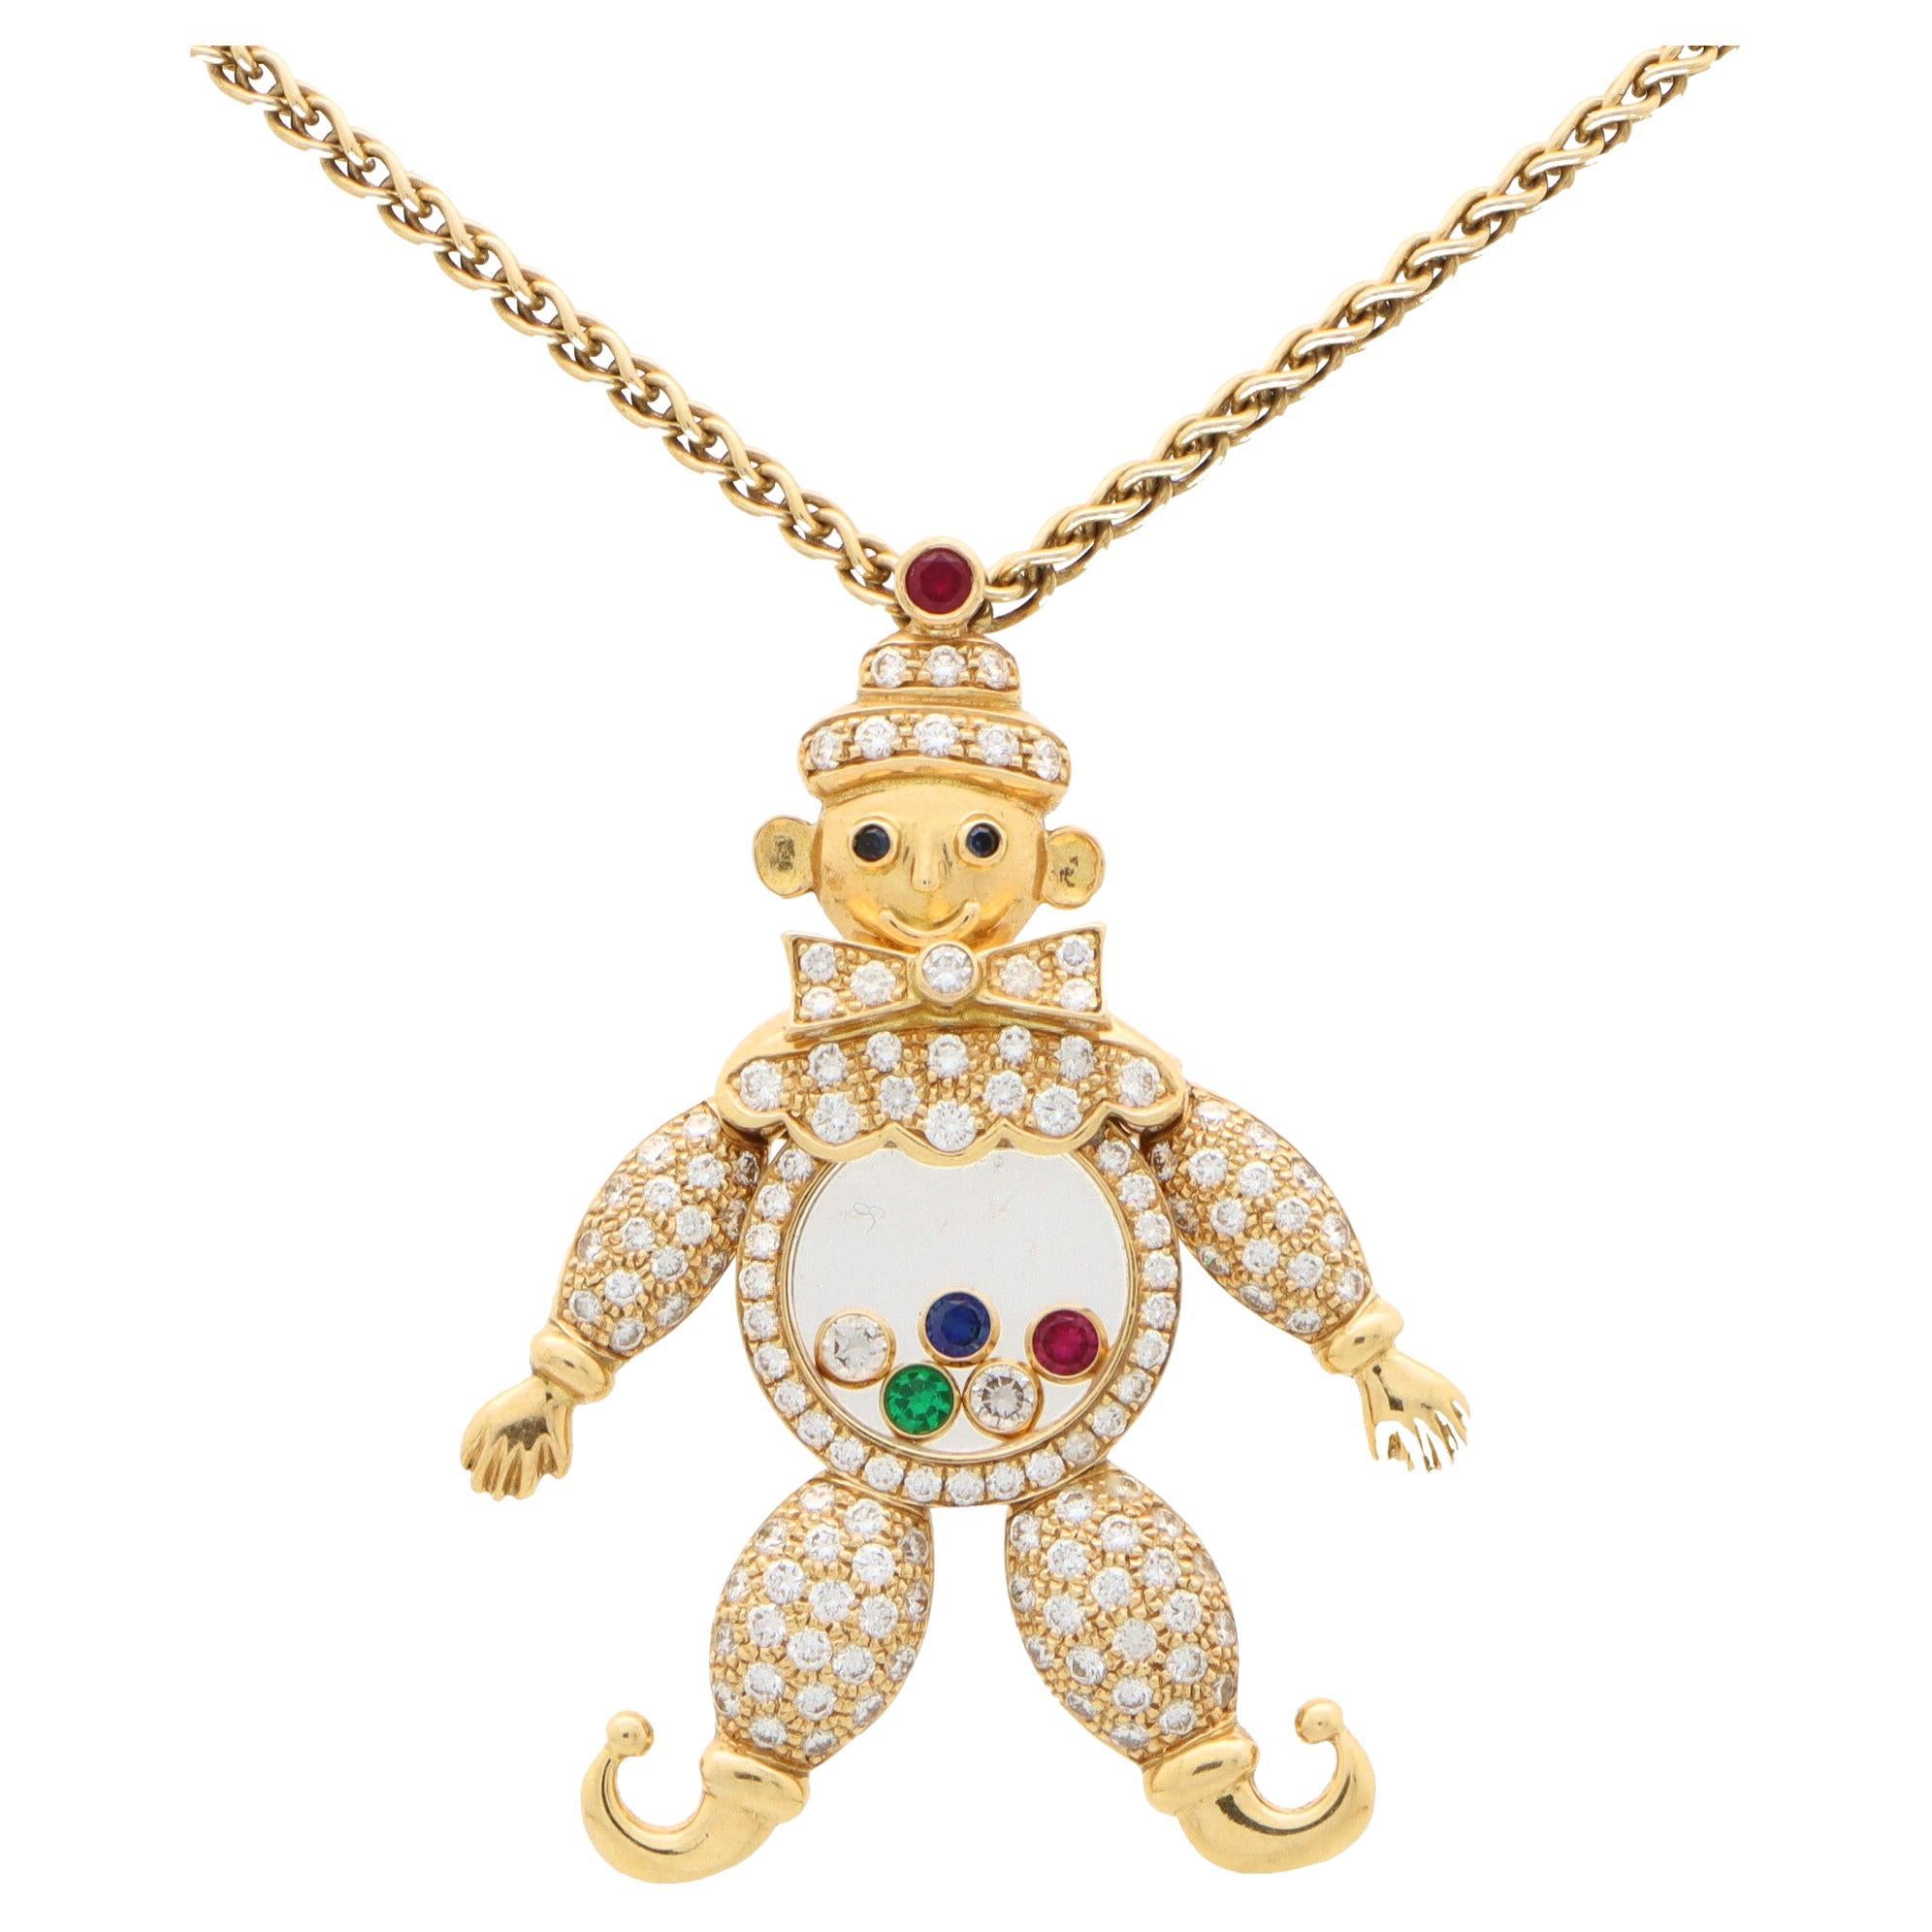 Vintage Chopard 'Happy Clown' Pendant Necklace with Diamonds in 18k Yellow Gold